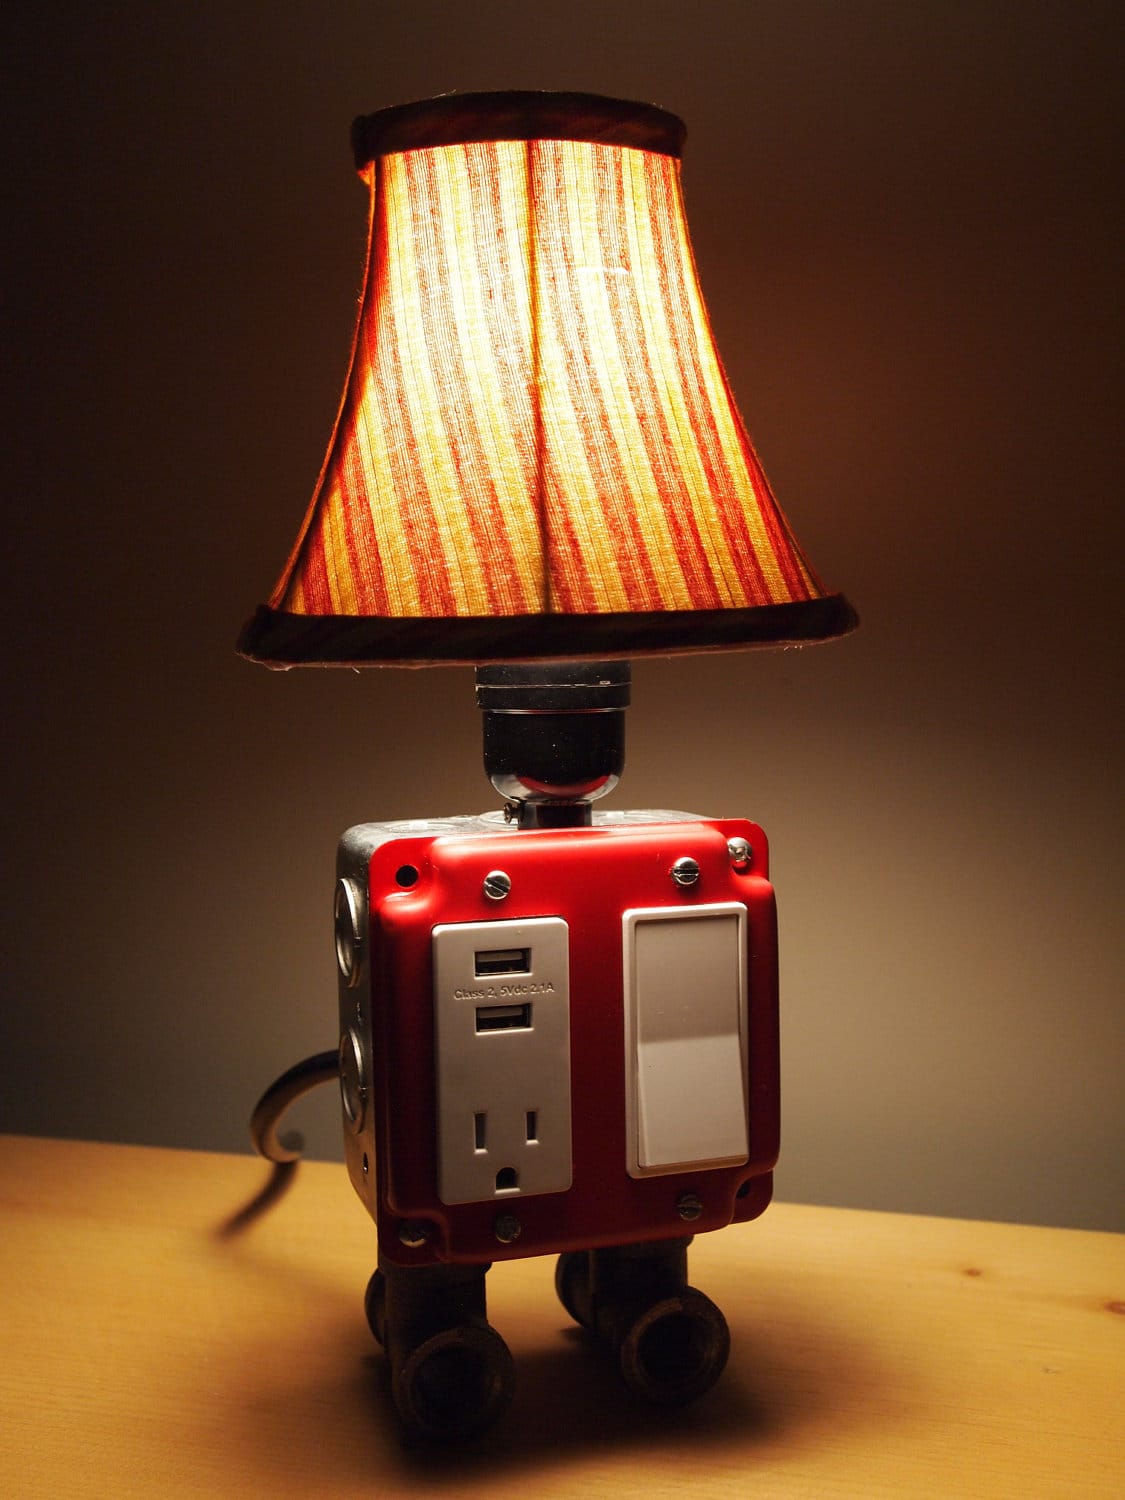 Gadget Charger Table Lamps For A True Geek’s Living Quarters